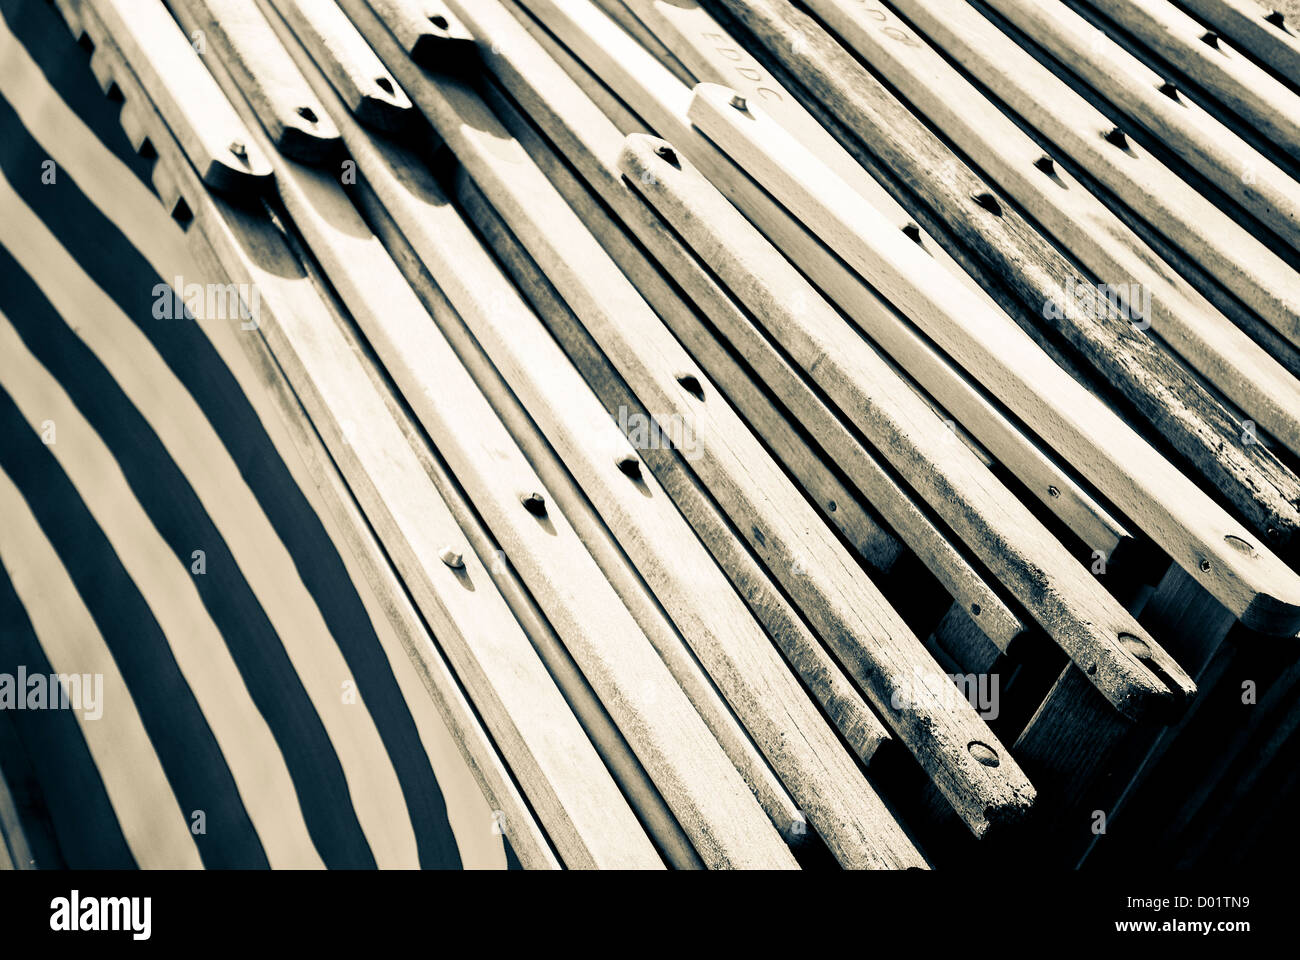 Stack of wooden deckchairs, desaturated effect Stock Photo